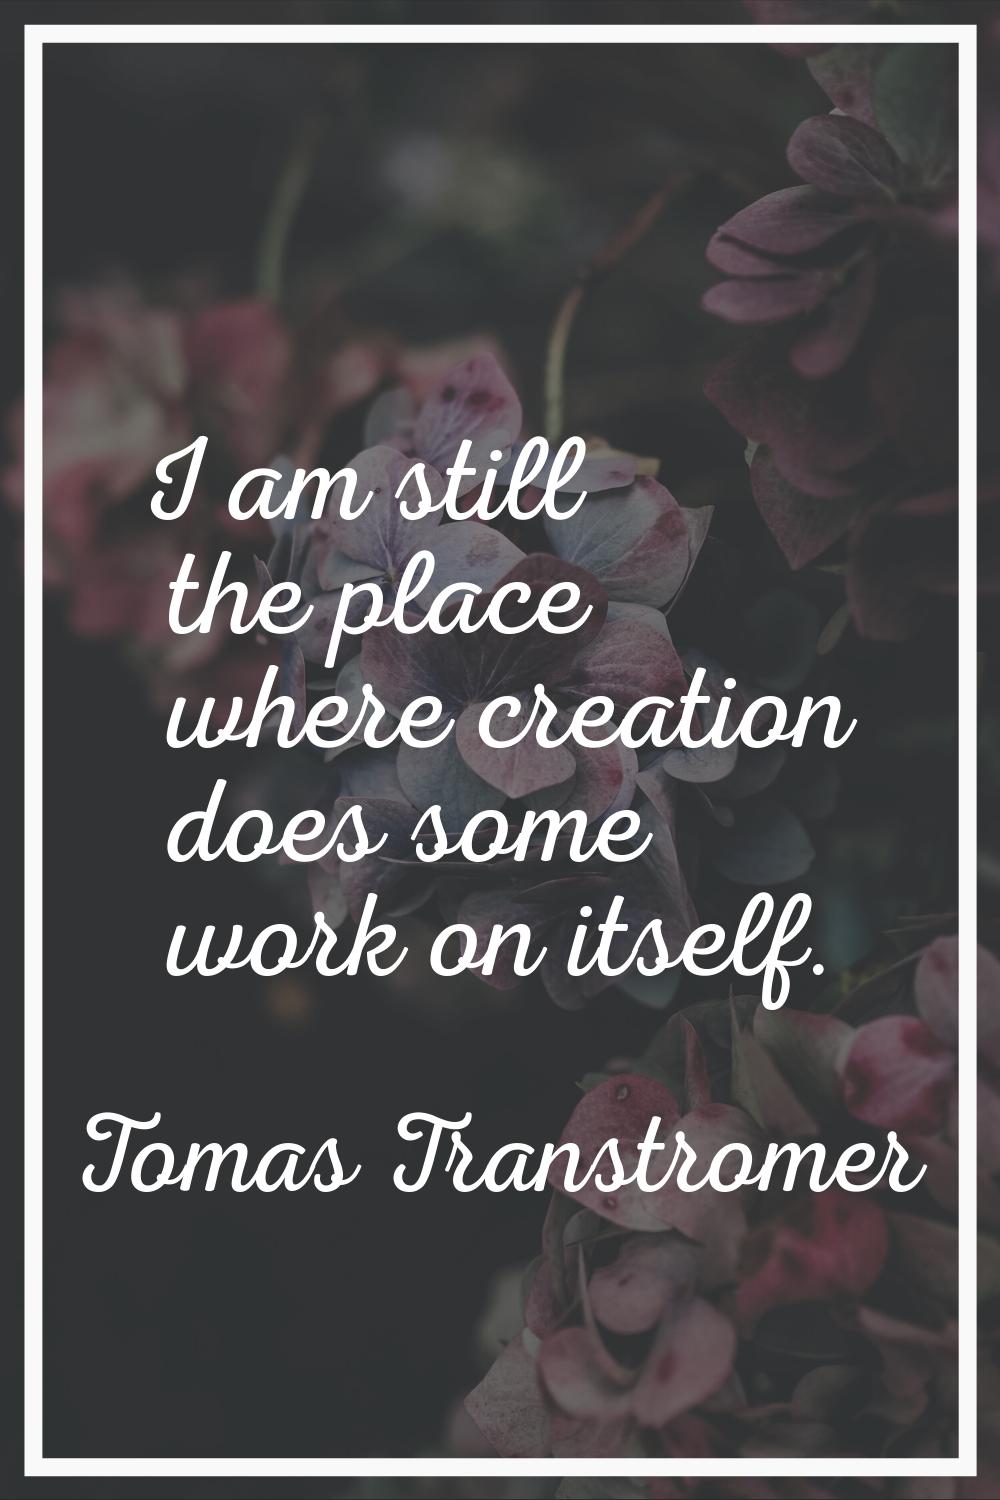 I am still the place where creation does some work on itself.